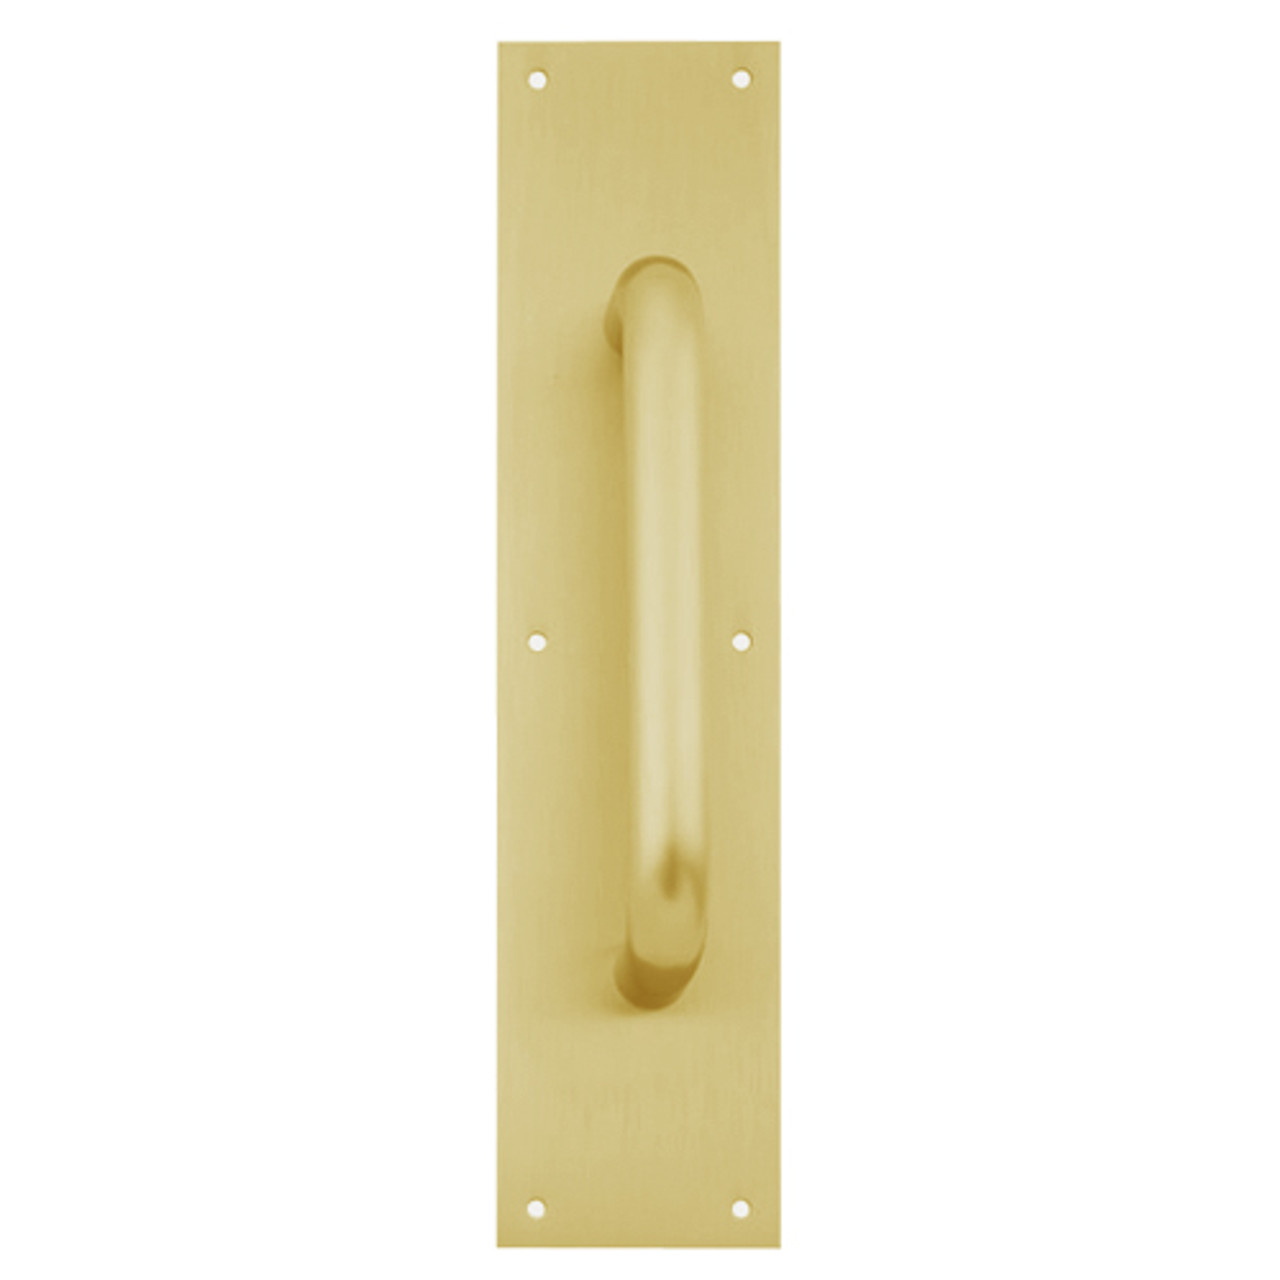 8303-10-US4-4x16 IVES Architectural Door Trim 4x16 Inch Pull Plate in Satin Brass